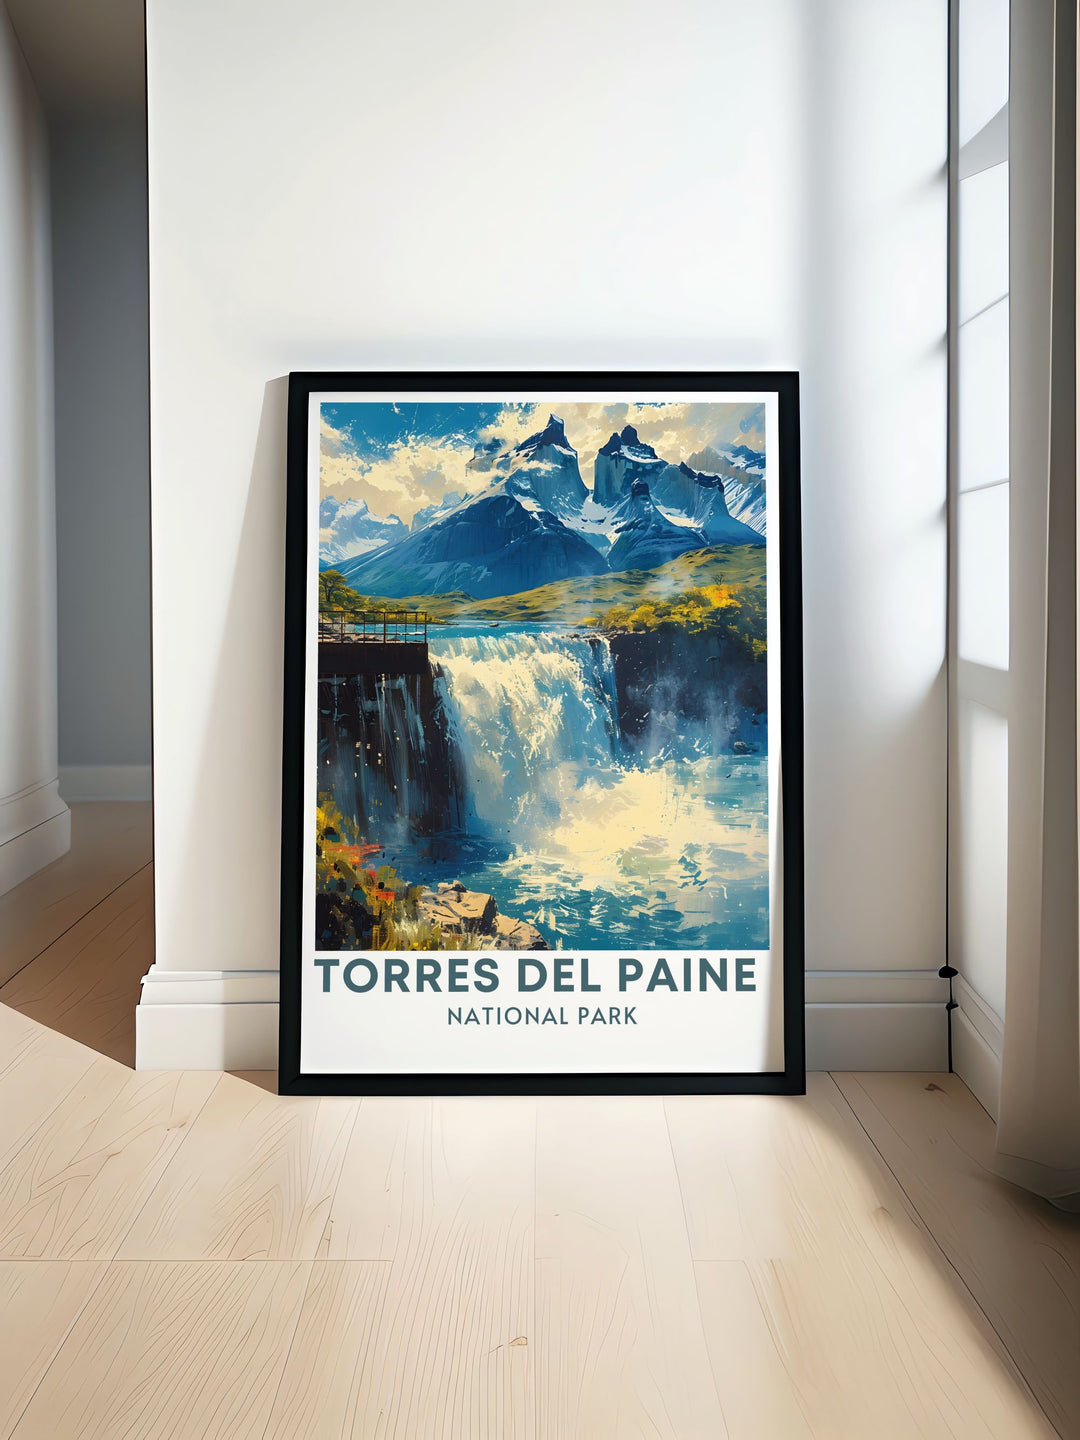 Salto Grande travel poster showcasing the majestic waterfall in Torres Del Paine National Park Patagonia Chile. This vintage print captures the beauty of South American landscapes making it perfect for home decor or as a gift for travel enthusiasts.